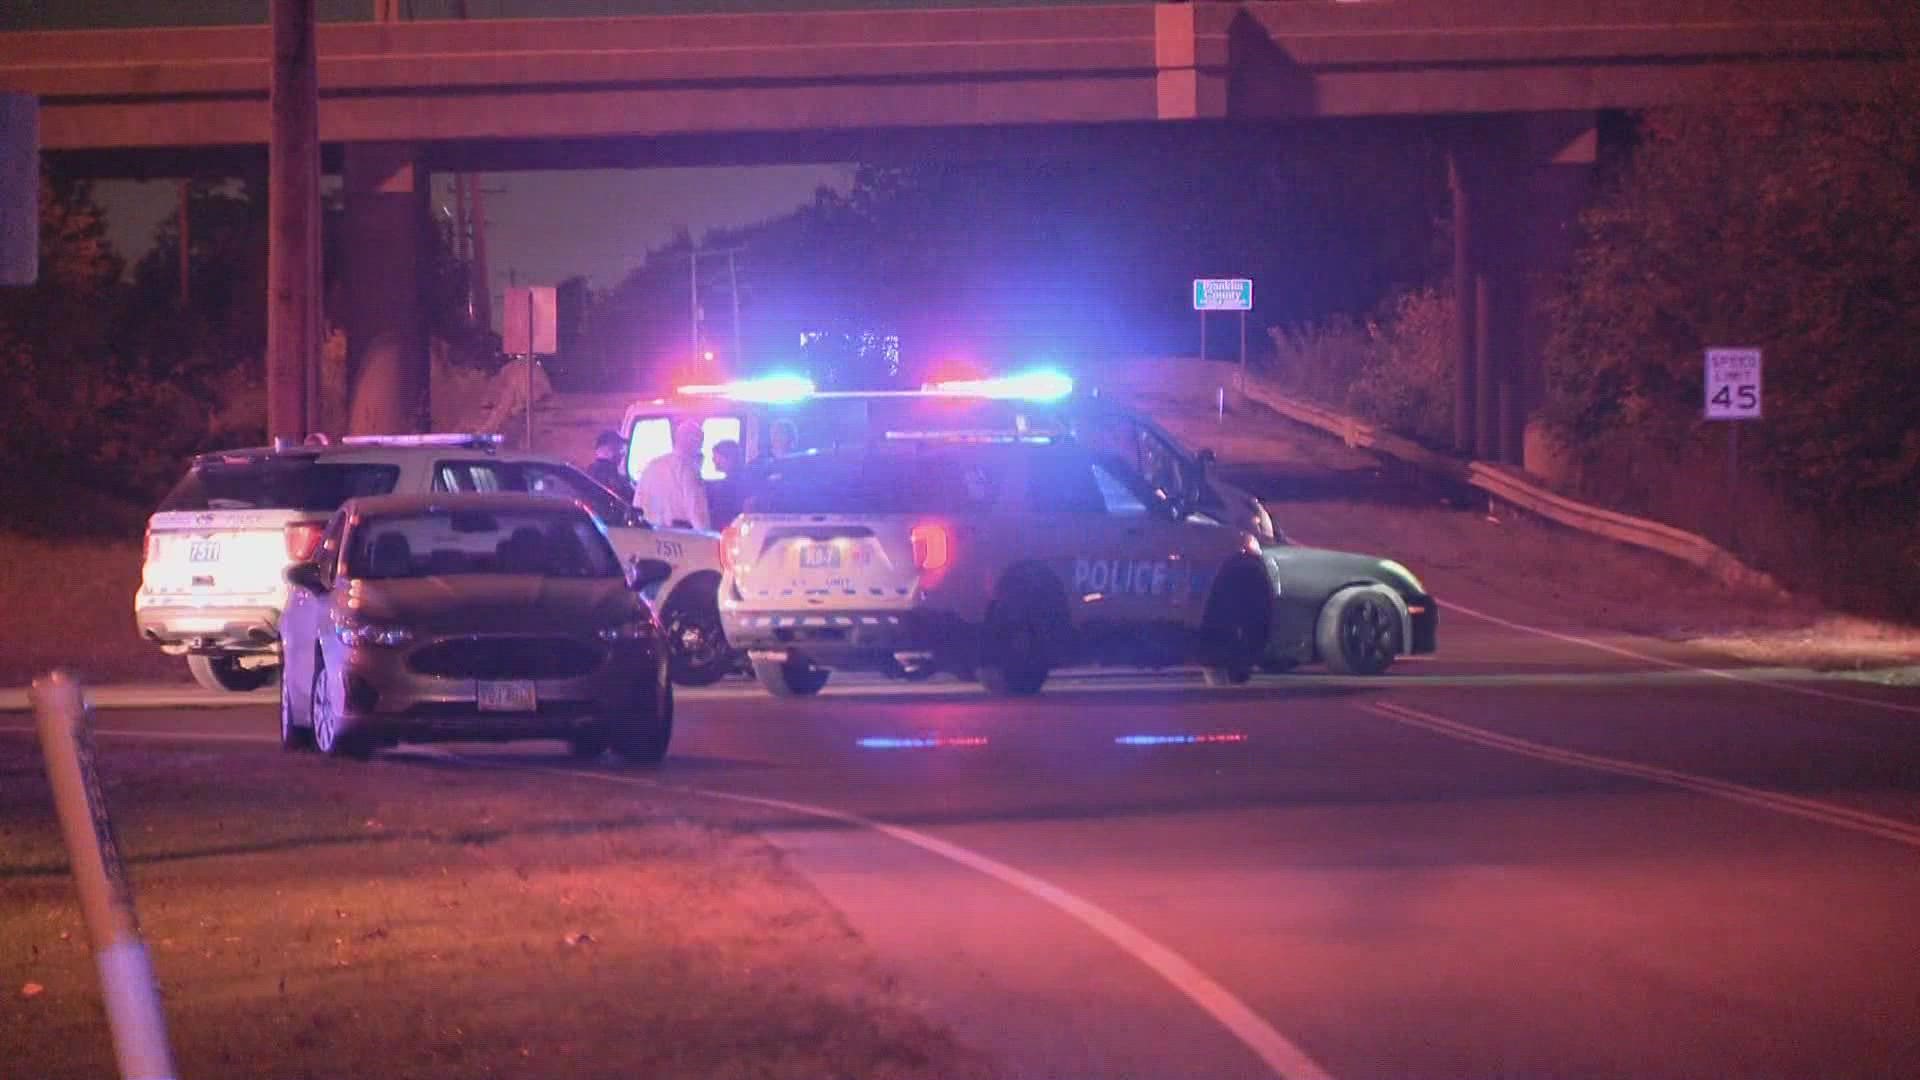 Police said the chase started on East Livingston and College avenues just before 7 p.m.